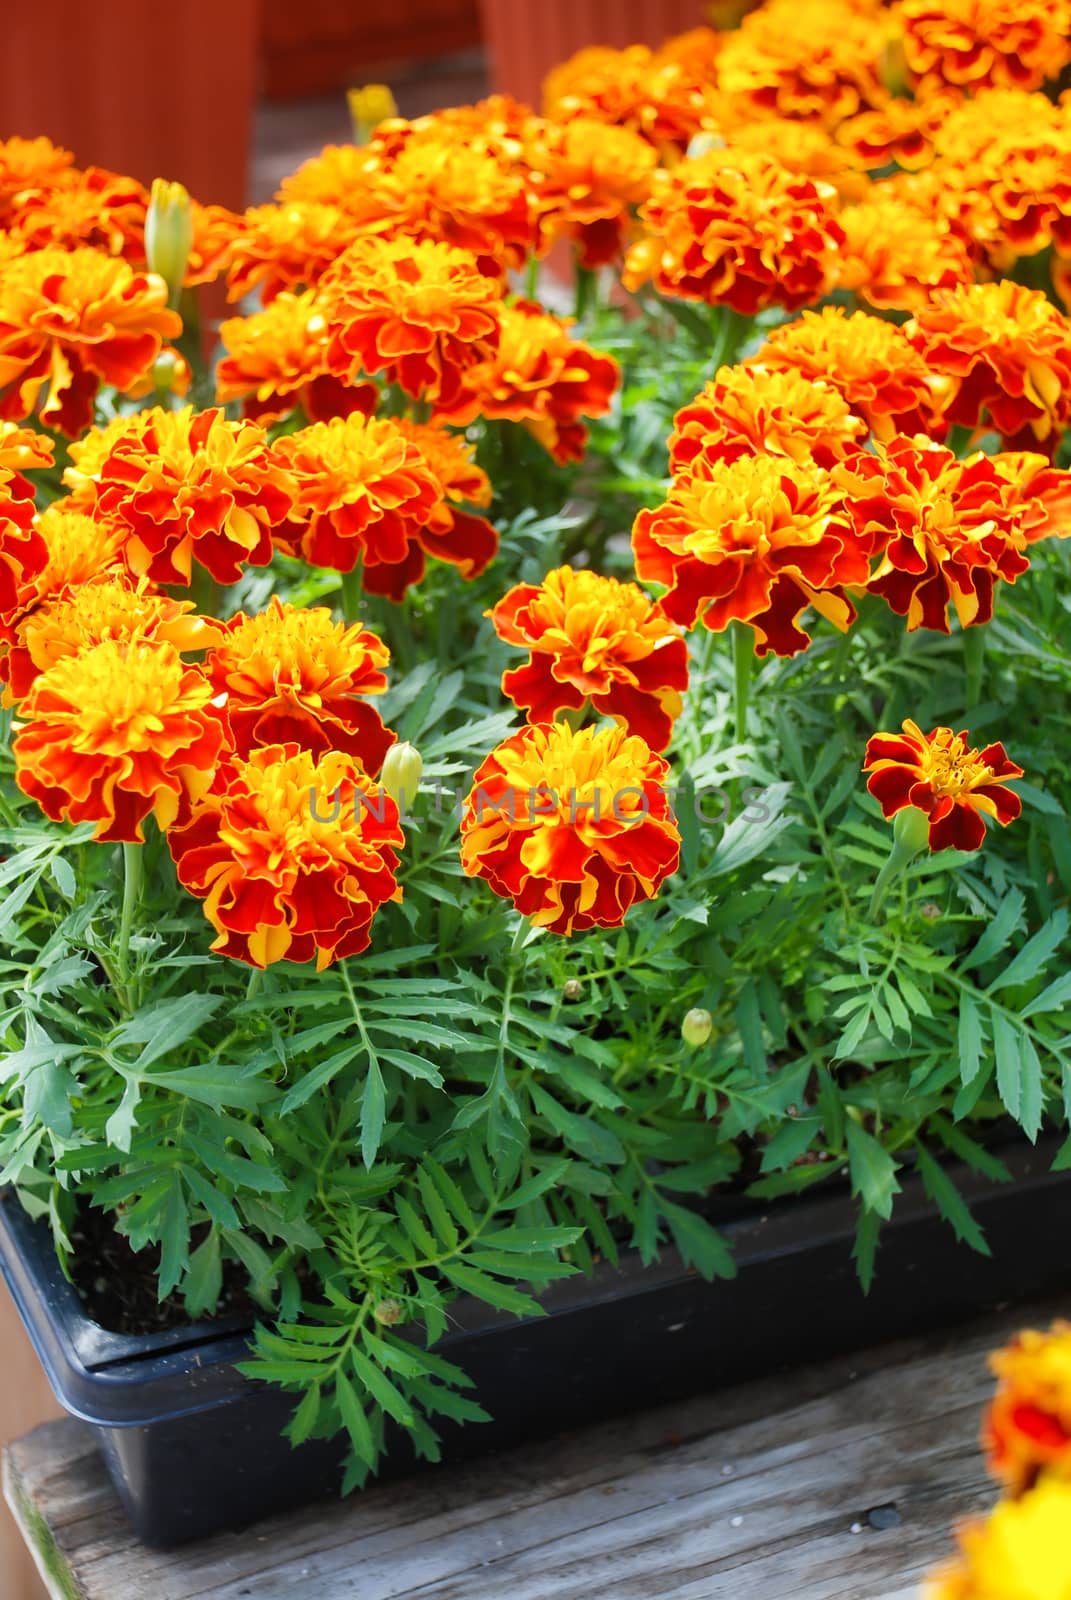 Tagetes patula French marigold in bloom, orange yellow flowers,  by yuiyuize